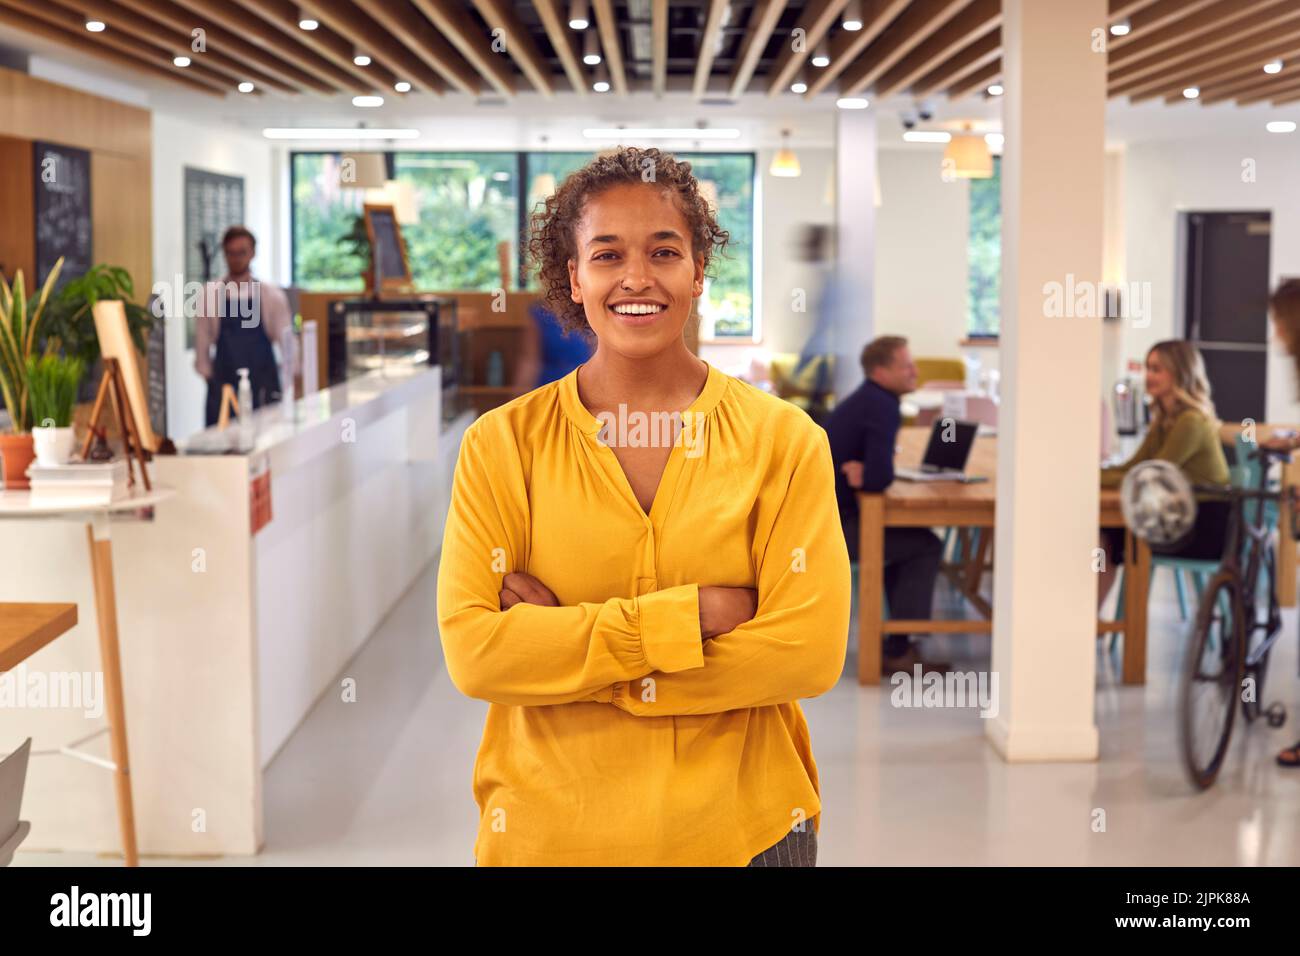 woman, office, cafe, cafeteria, staff, female, ladies, lady, women, offices, cafes, cafeterias, canteen, staffs Stock Photo